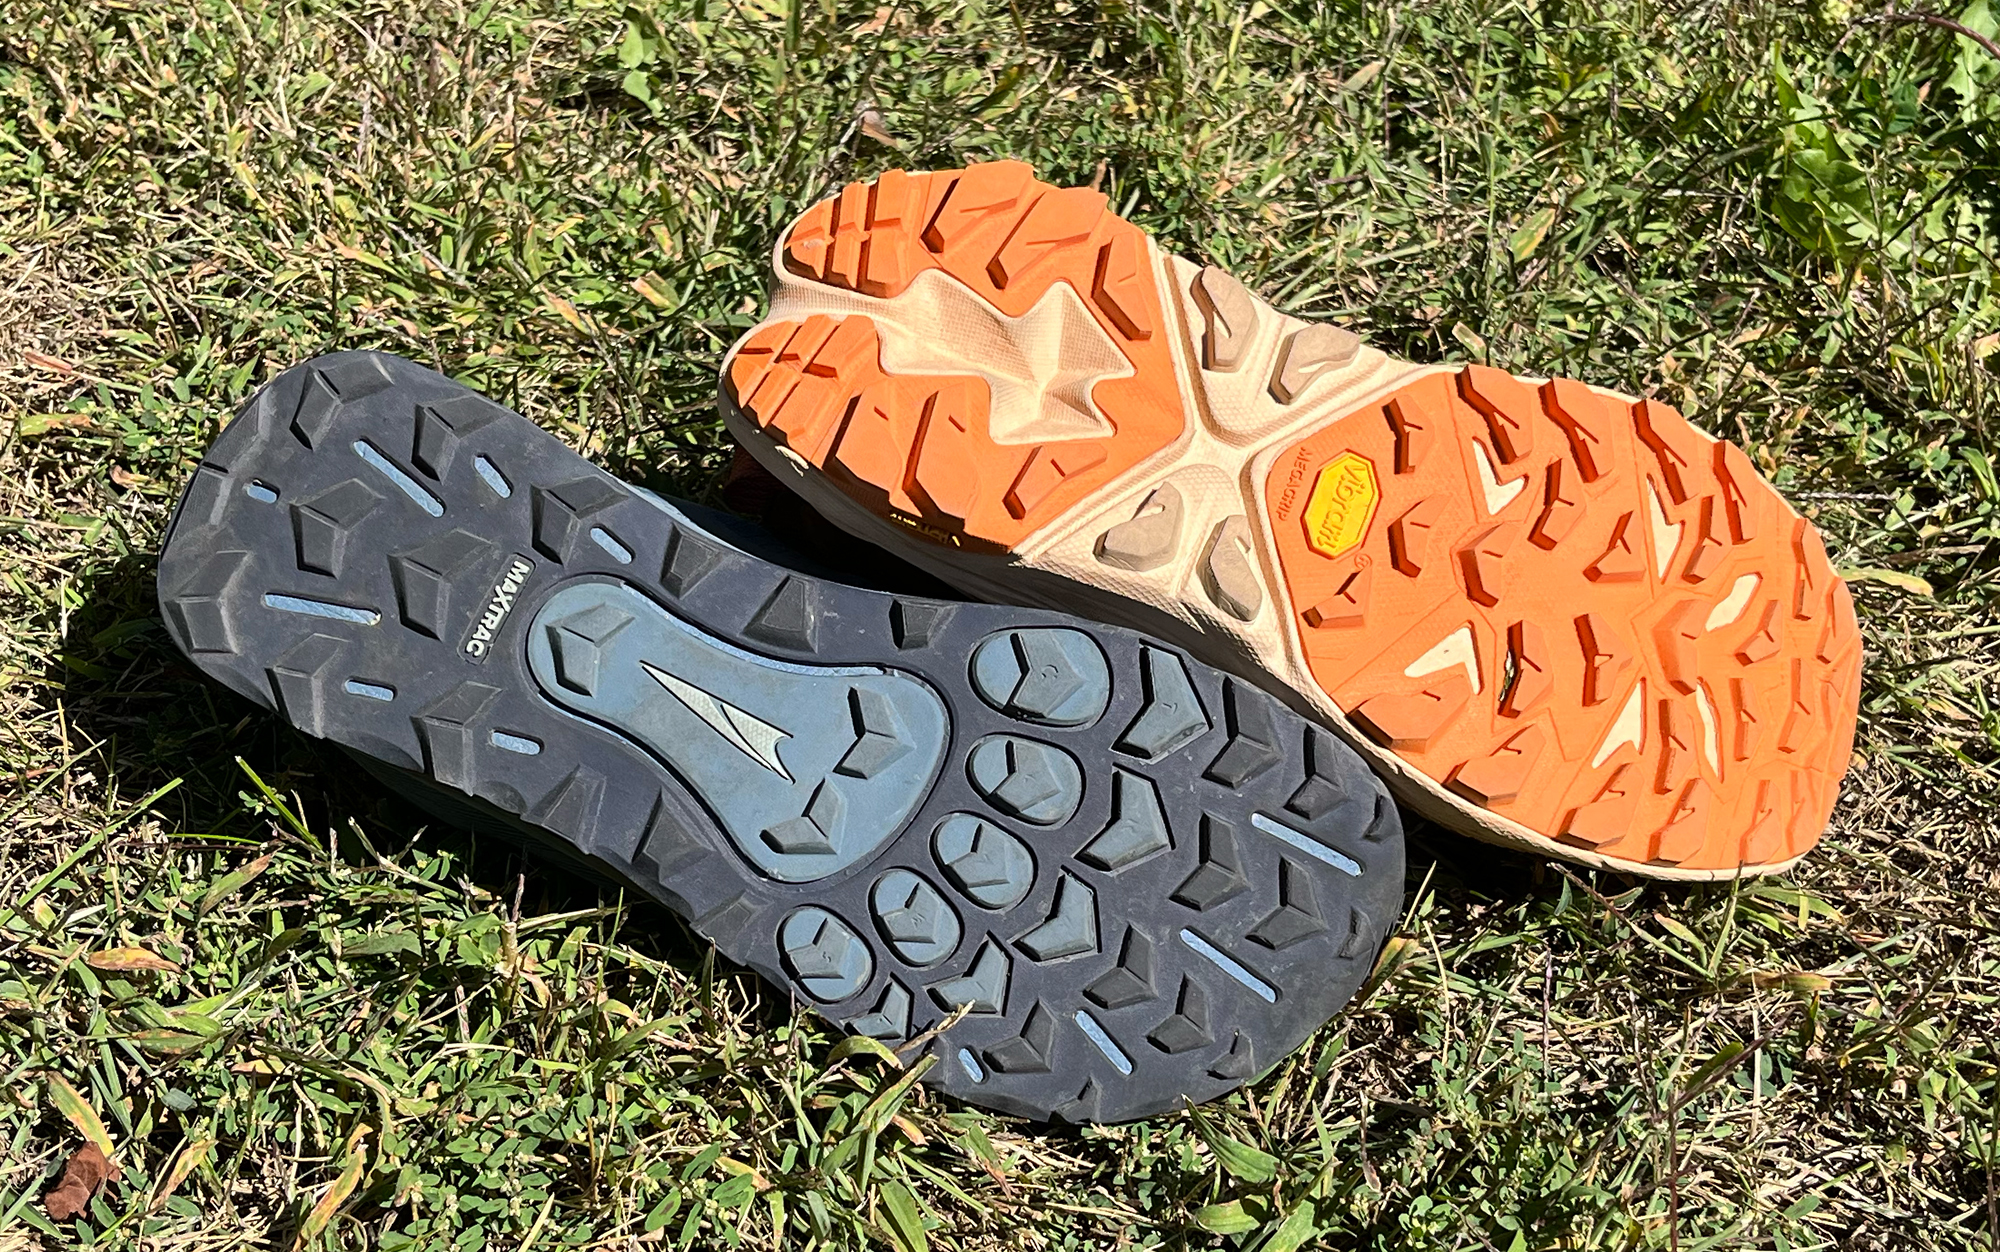 The Altra Lone Peak and Hoka Anacapa sit upside down in the grass.